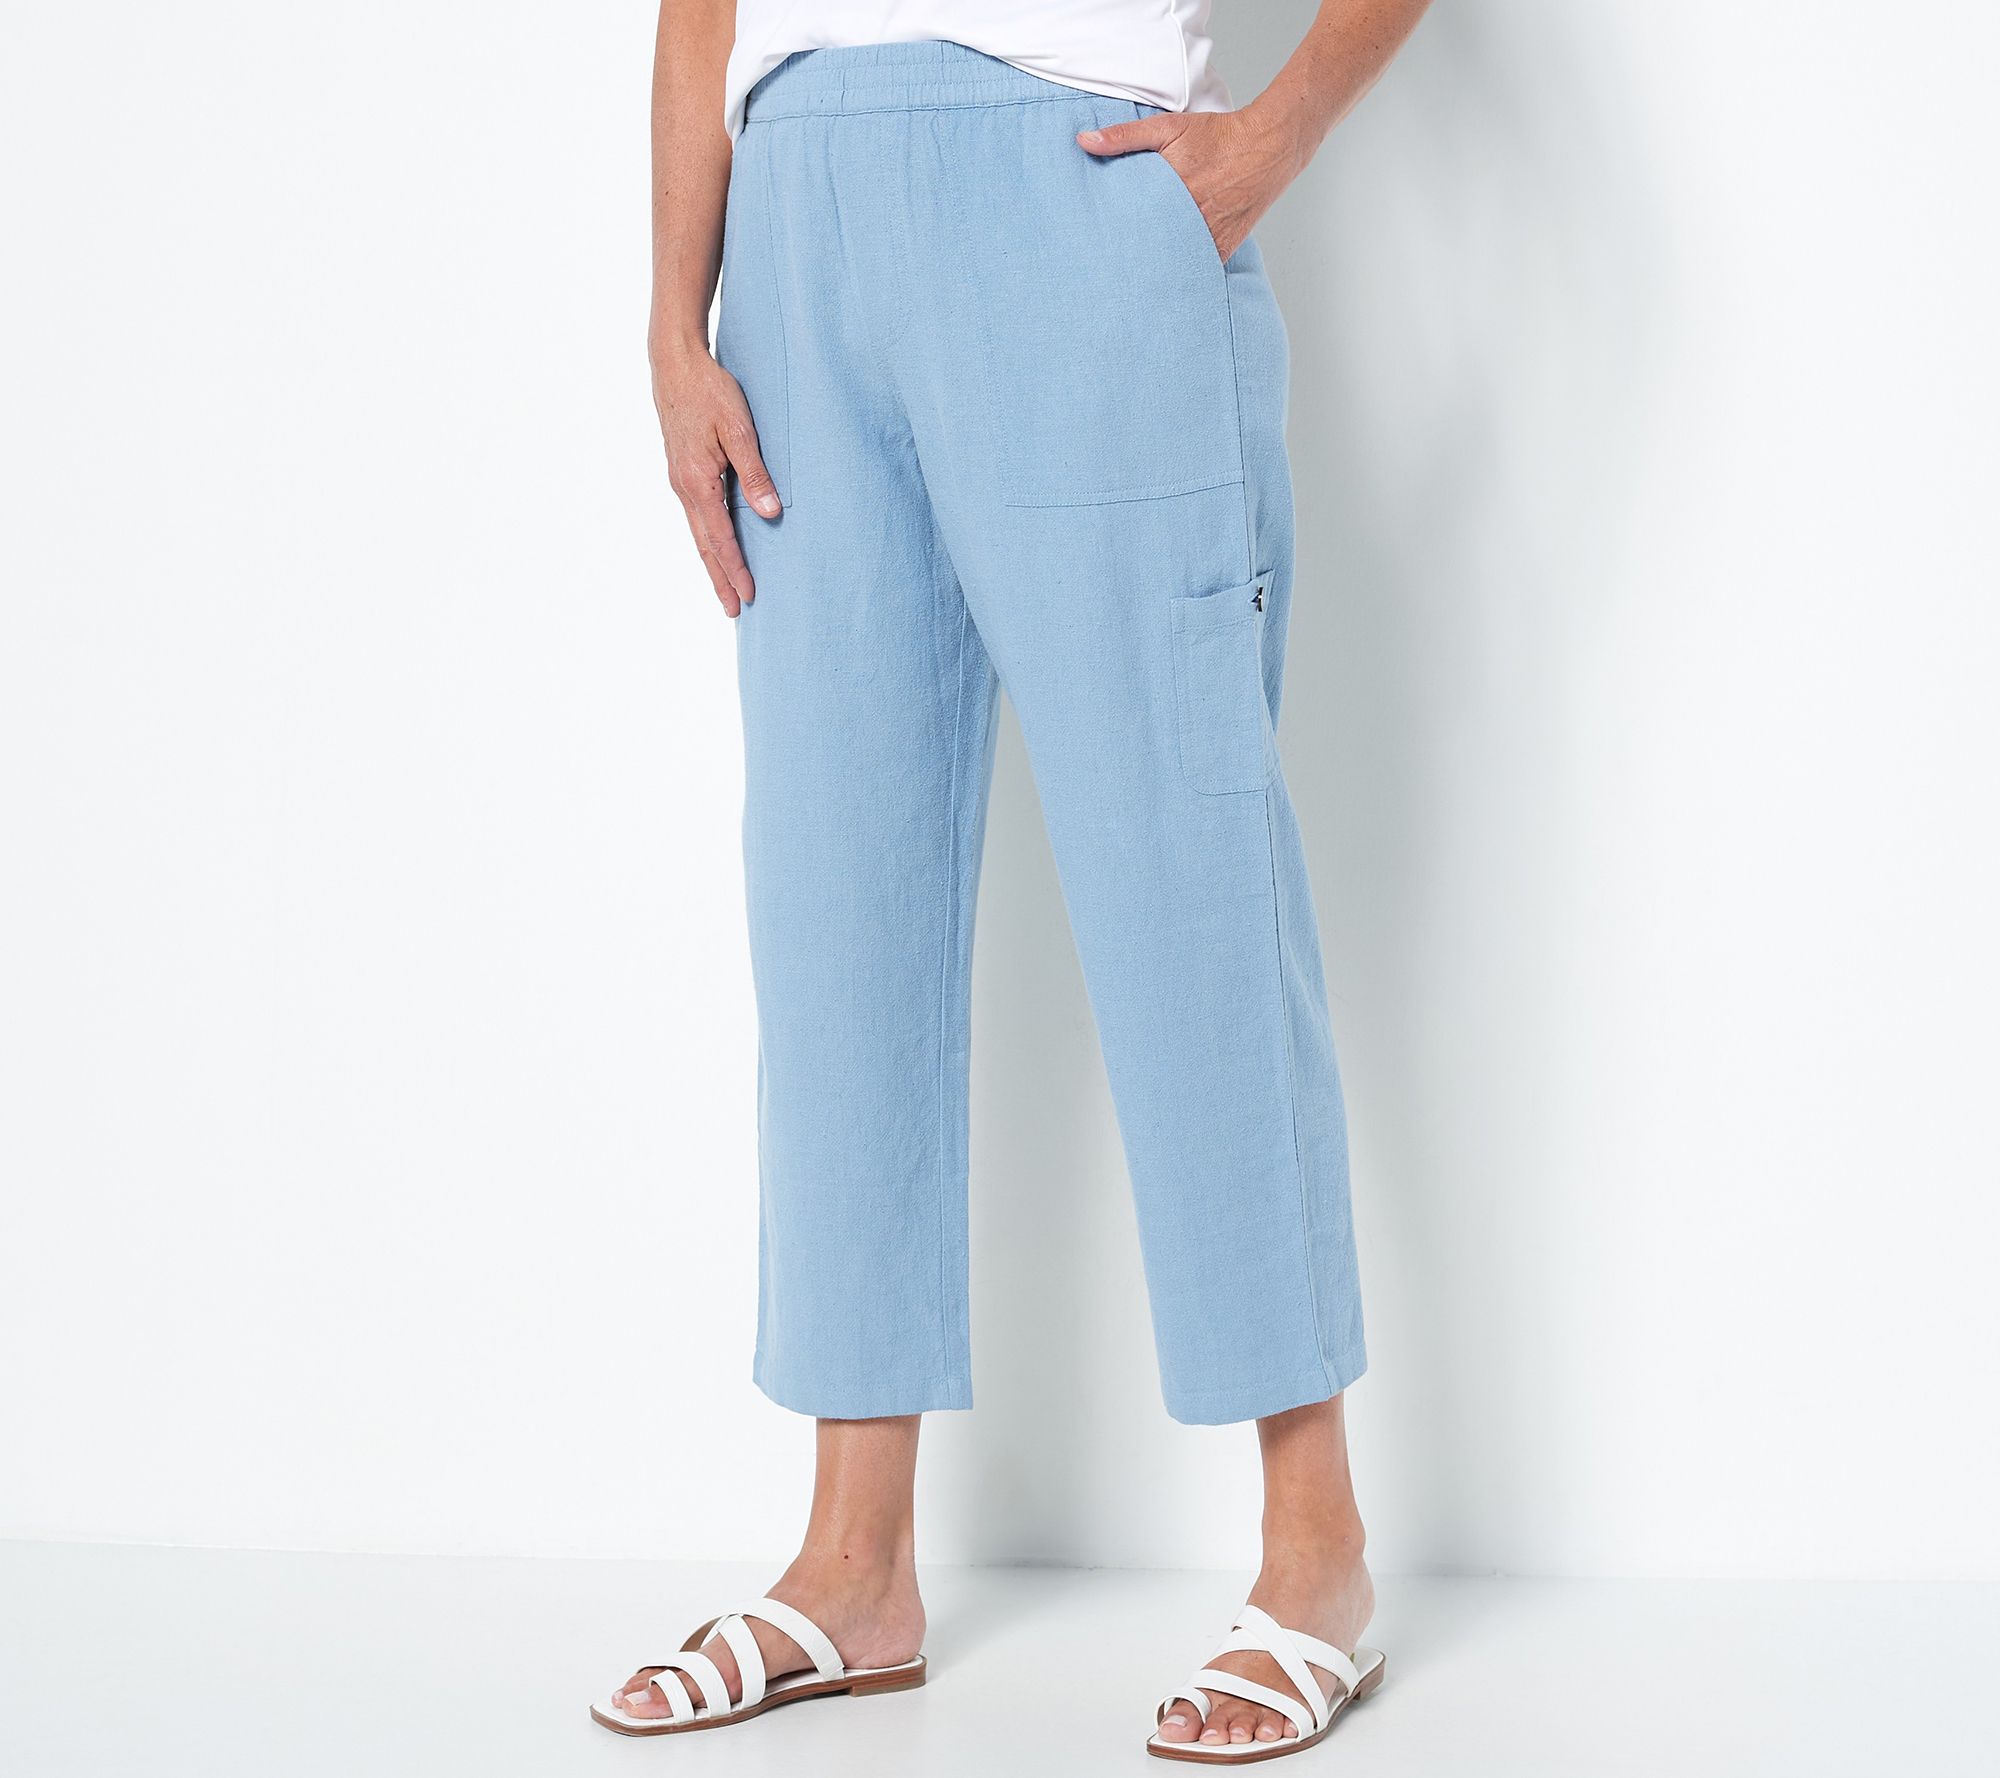 Linen Work Pant Summer Style - Oh What A Sight To See